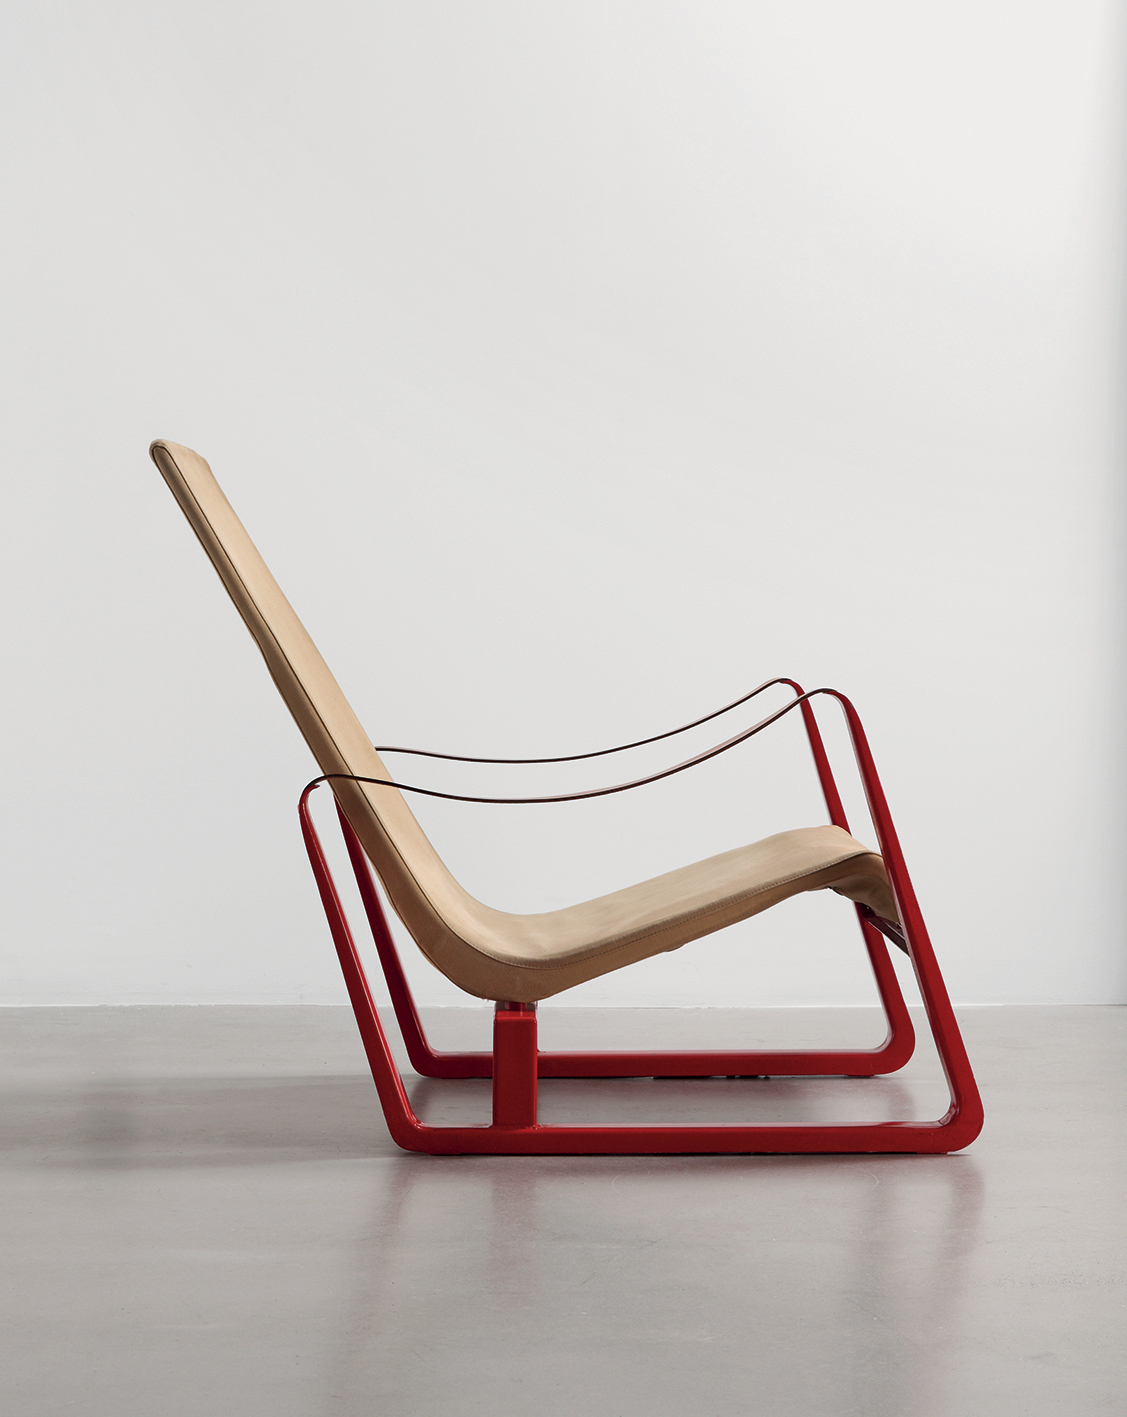 Cité armchair, 1930. Sheet steel, leather and stretched canvas.